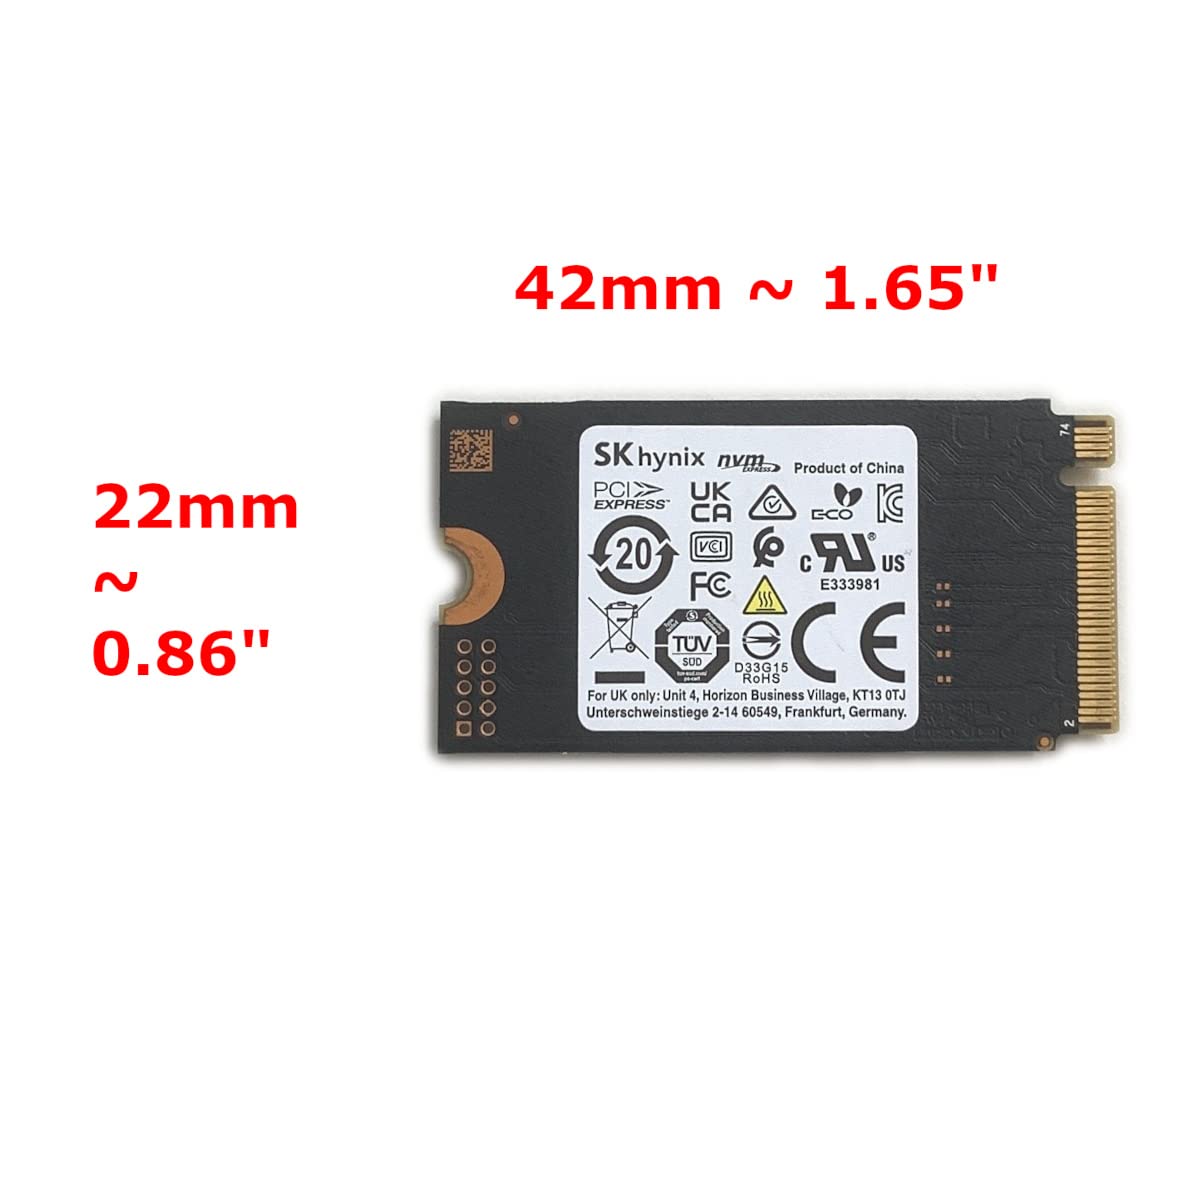 SK Hynix SSD 512GB M.2 2242 42mm BC711 NVMe PCIe Gen3 x4 HFM512GD3HX015N Solid State Drive for Dell HP Lenovo Ultrabook Tablet